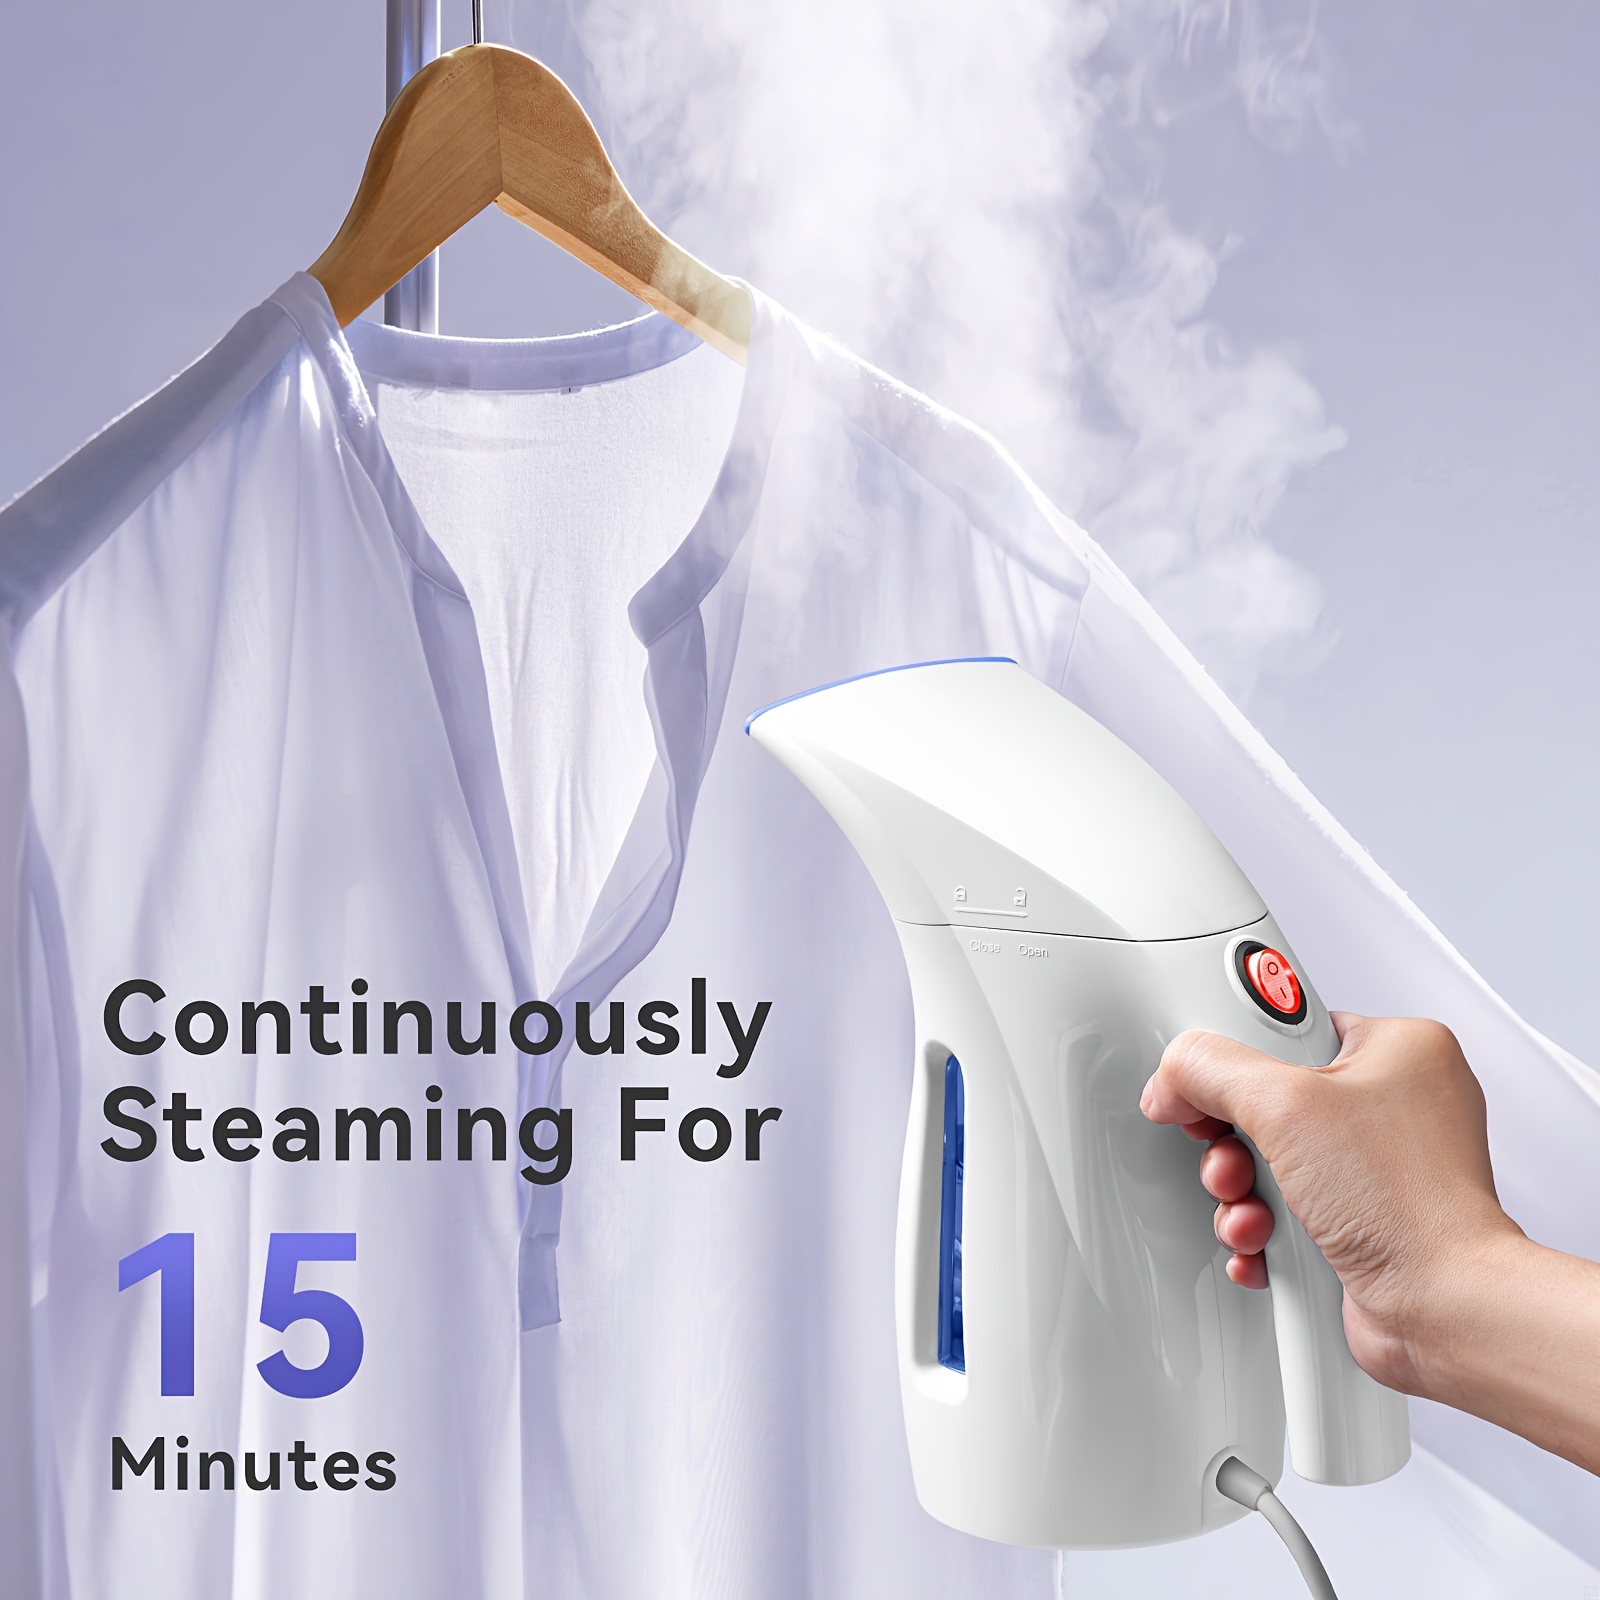 

Steamer For Clothes, Portable Handheld Design, 240 Ml Capacity, 700 W Super Power, Powerful Penetrating Steam, Removes Creases For Ironing Instantly Freshen Clothes, For Home, Office And Travelling